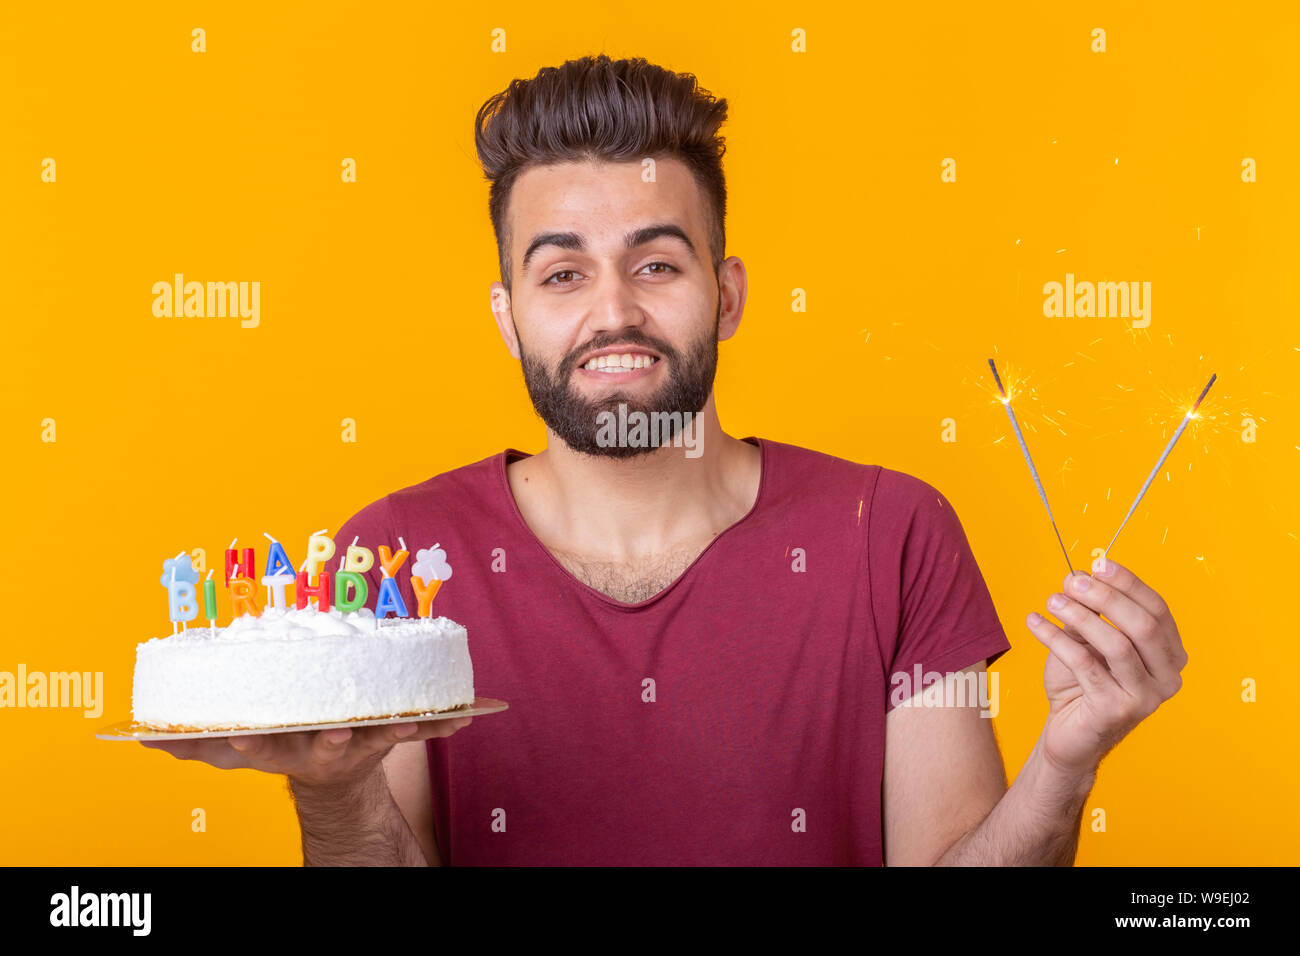 Positive Young Man Holding A Happy Birthday Cake And Two Burning Bengal Lights Posing On A Yellow Background Stock Photo Alamy